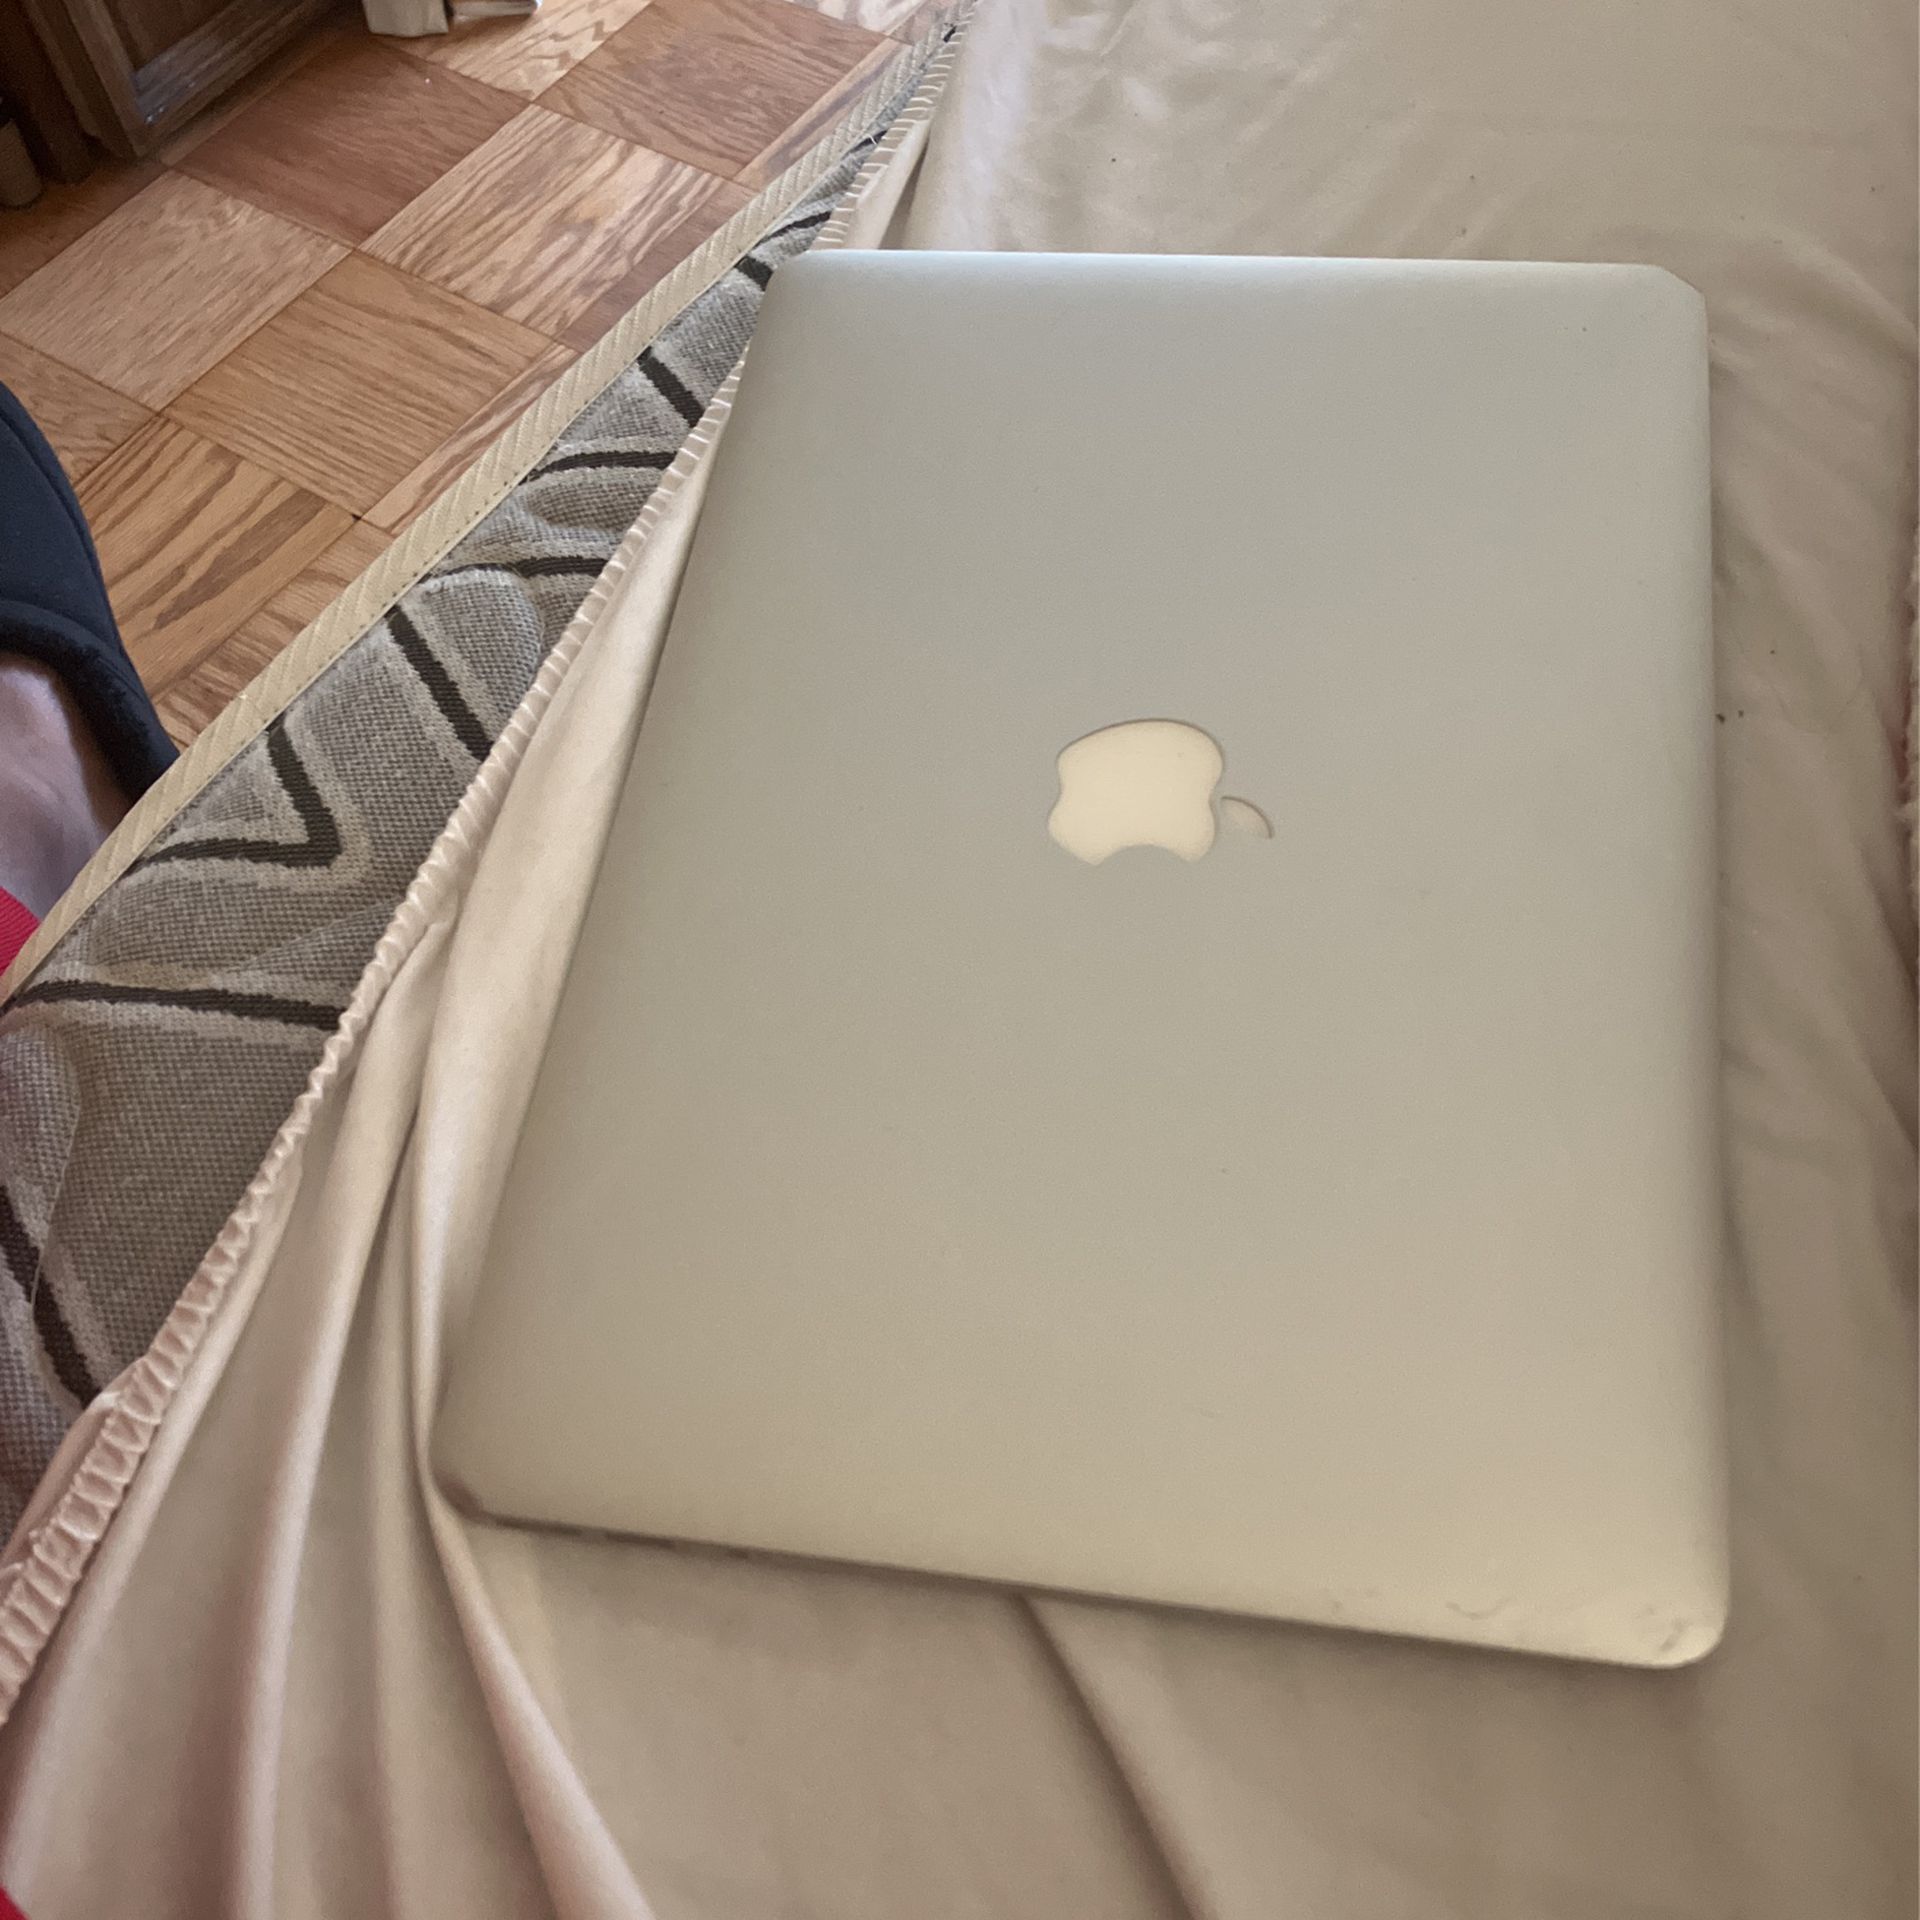 Mac Book Air With Charger 